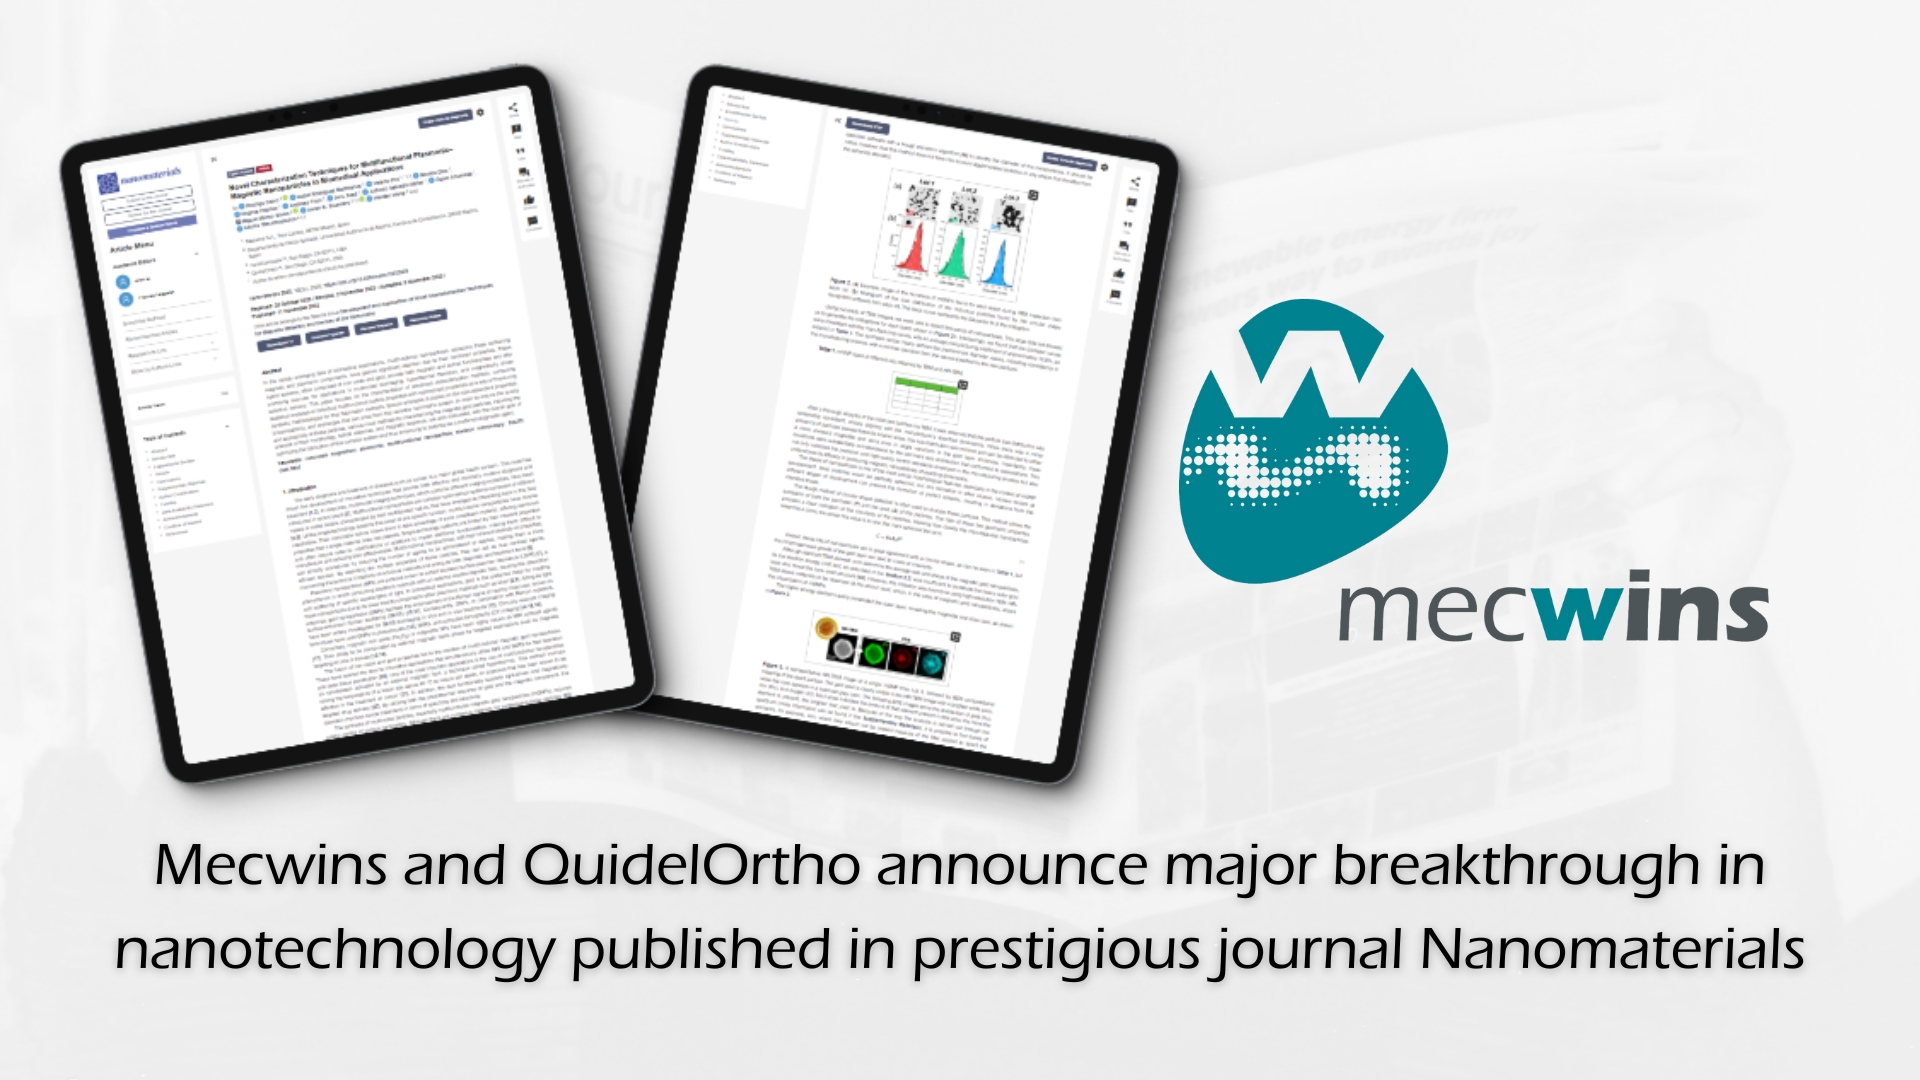 Mecwins and QuidelOrtho announce major breakthrough in nanotechnology published in prestigious journal Nanomaterials